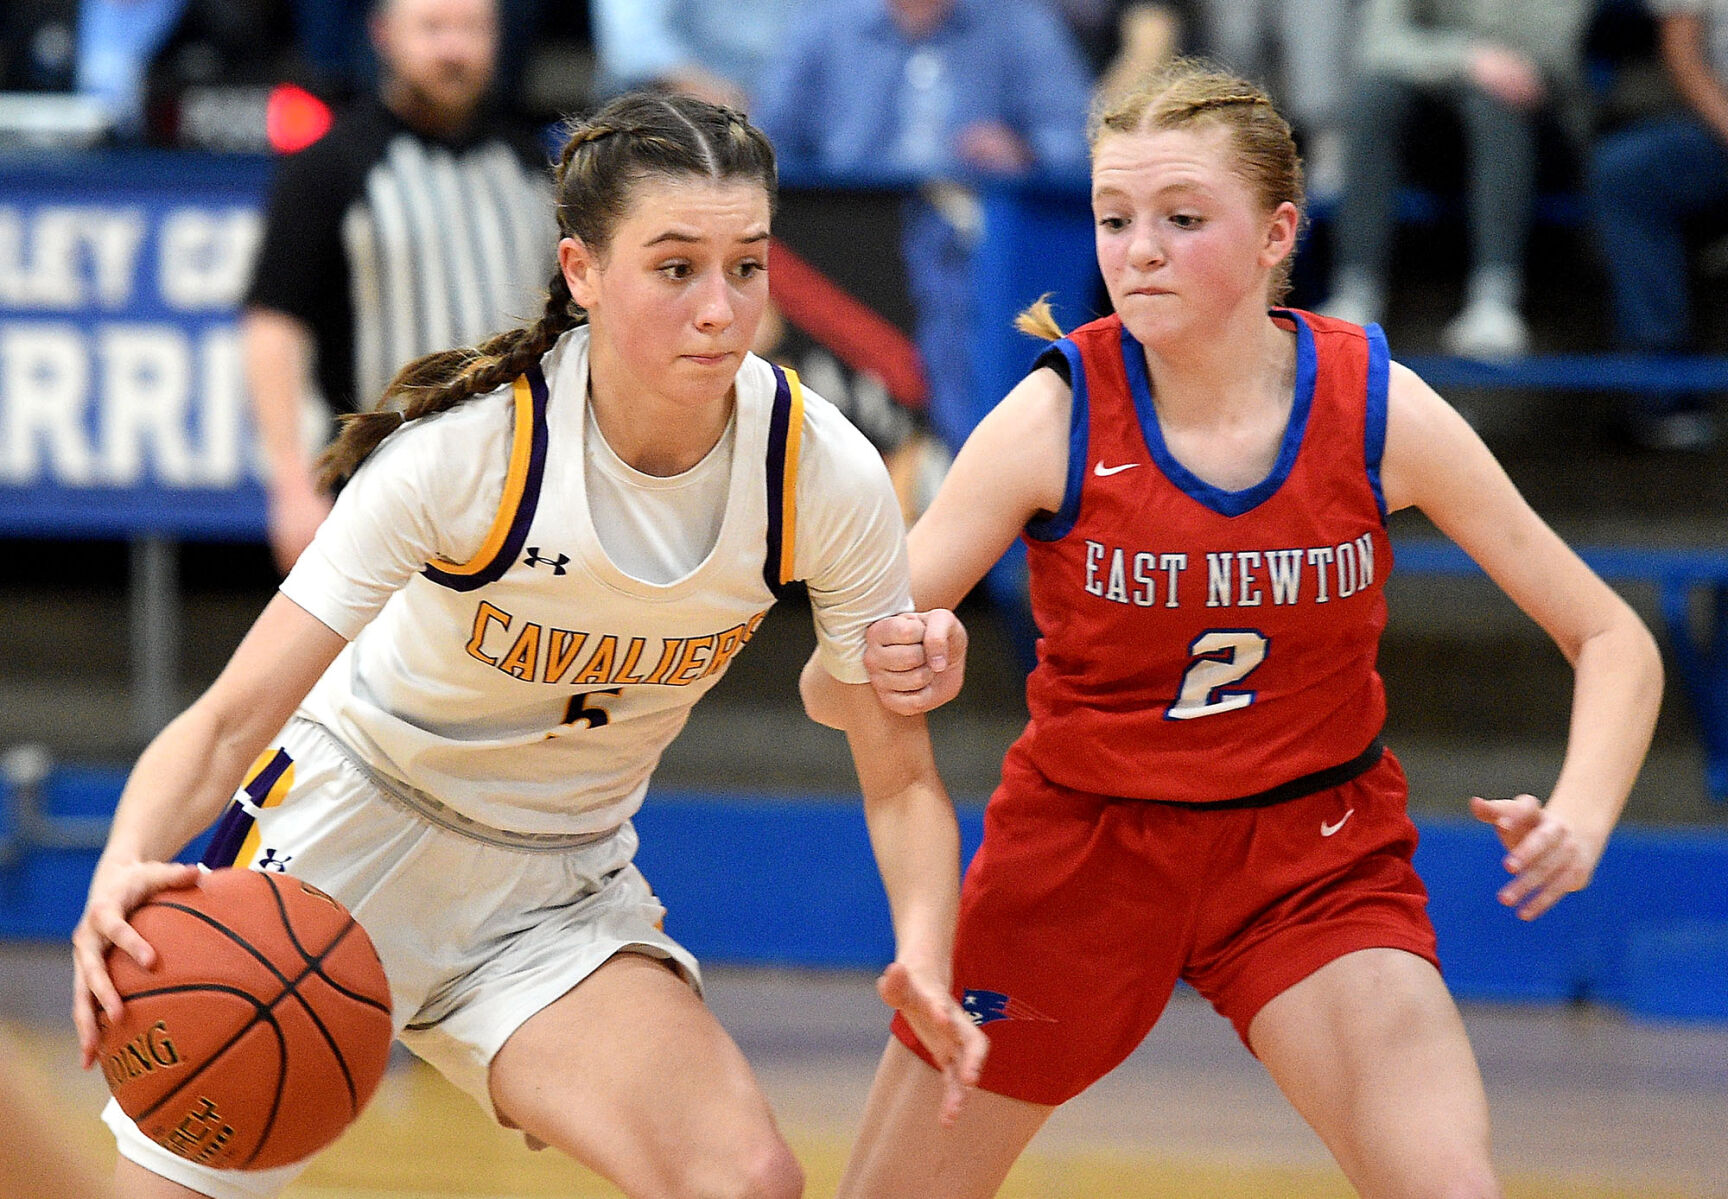 East Newton Patriots Win Thrilling Overtime Game Against Thomas Jefferson Cavaliers